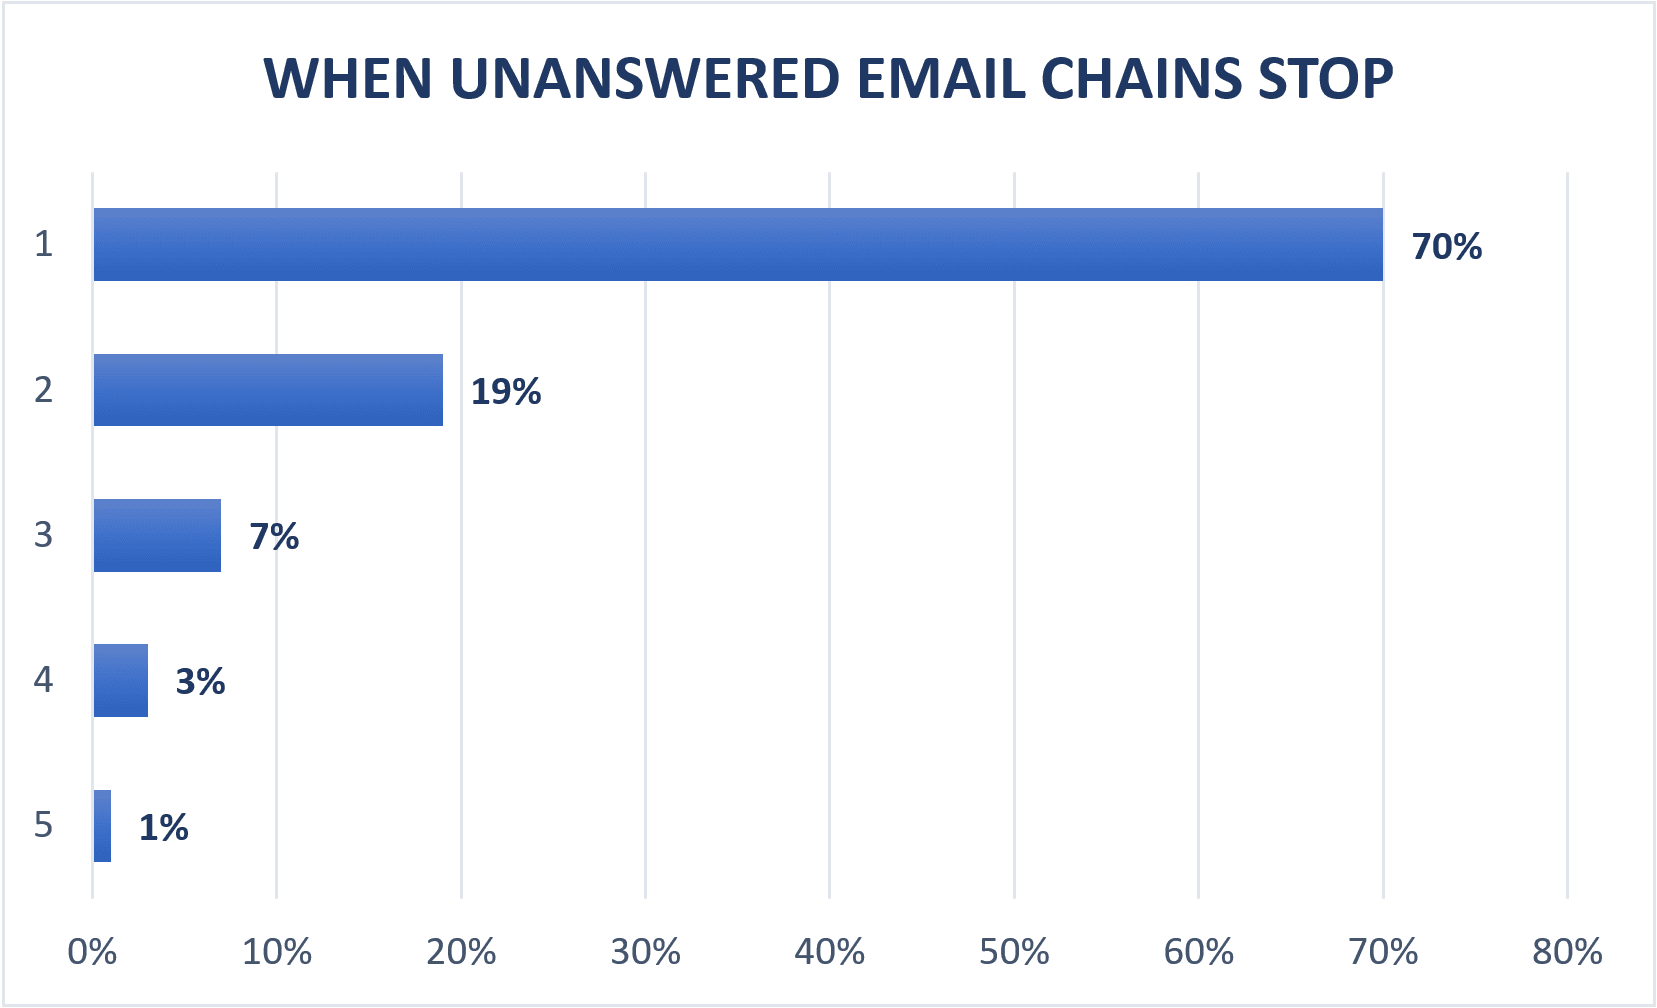 graph showing when unanswered email chains stop